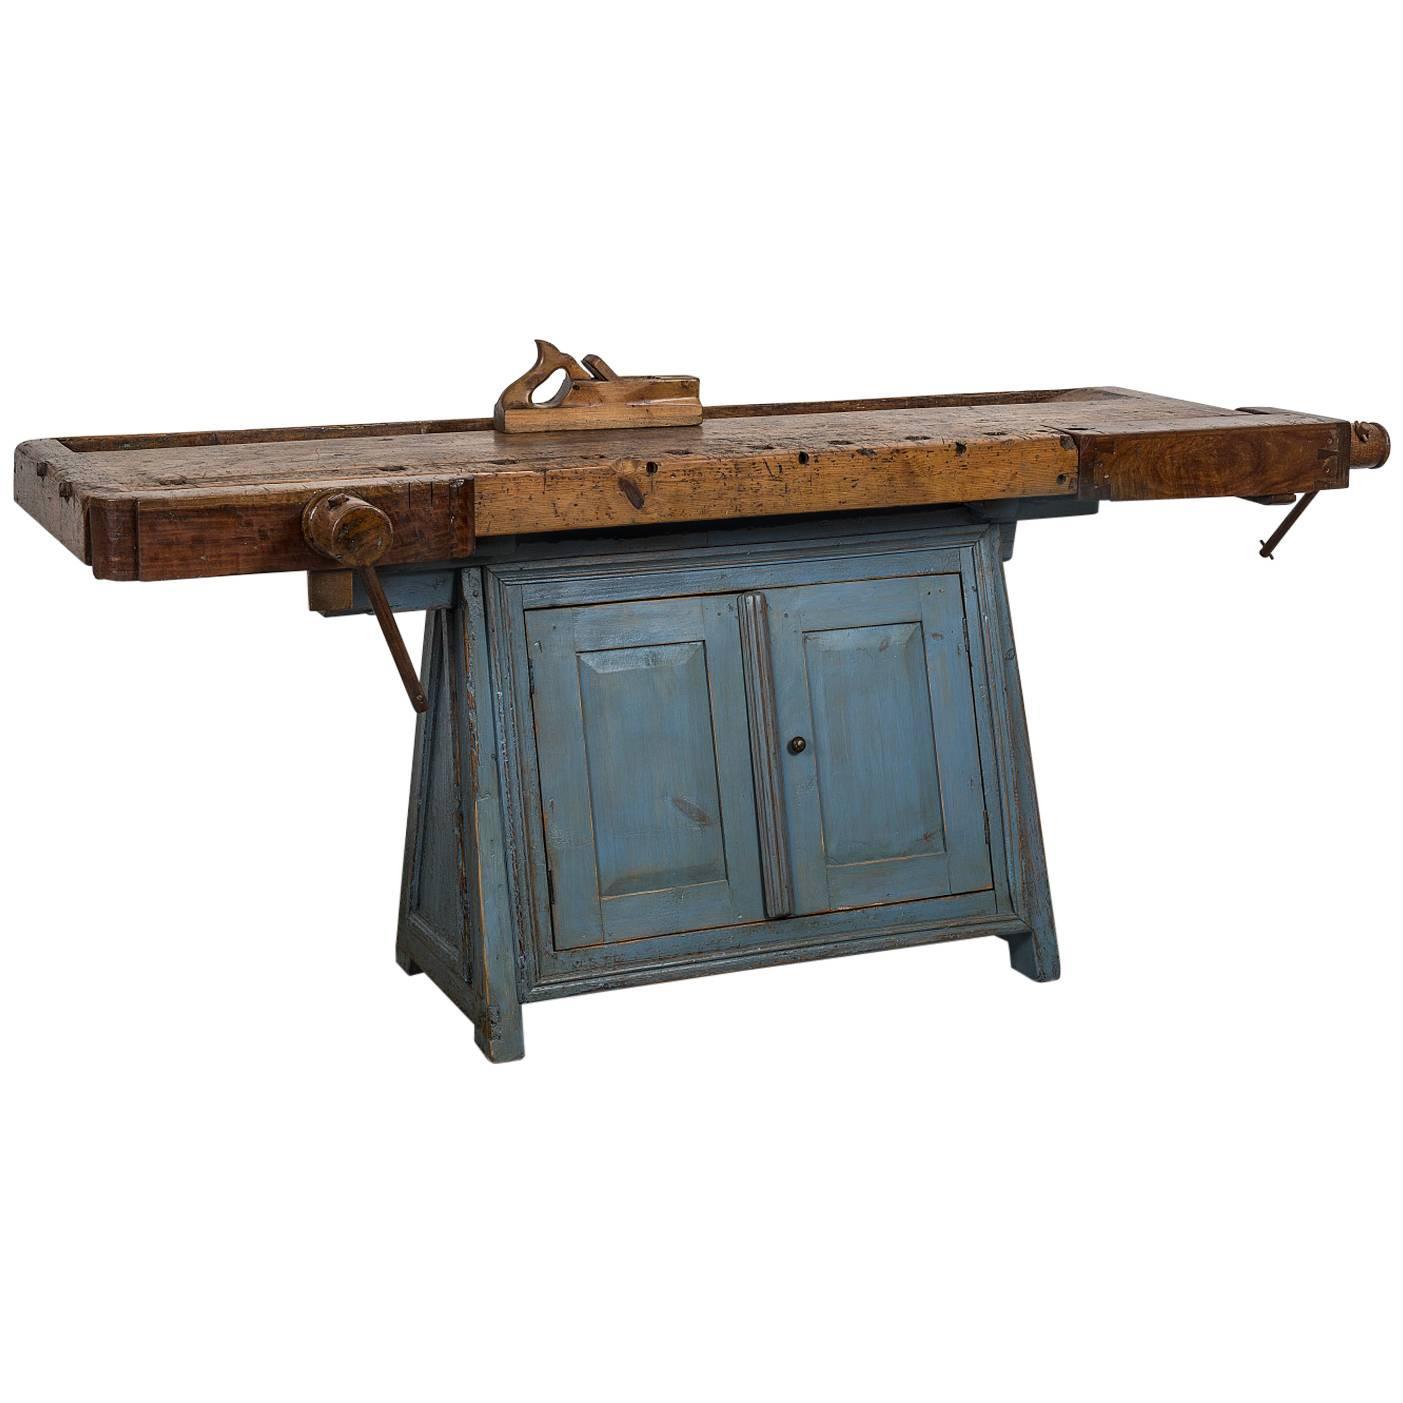 Woodworker Bench at